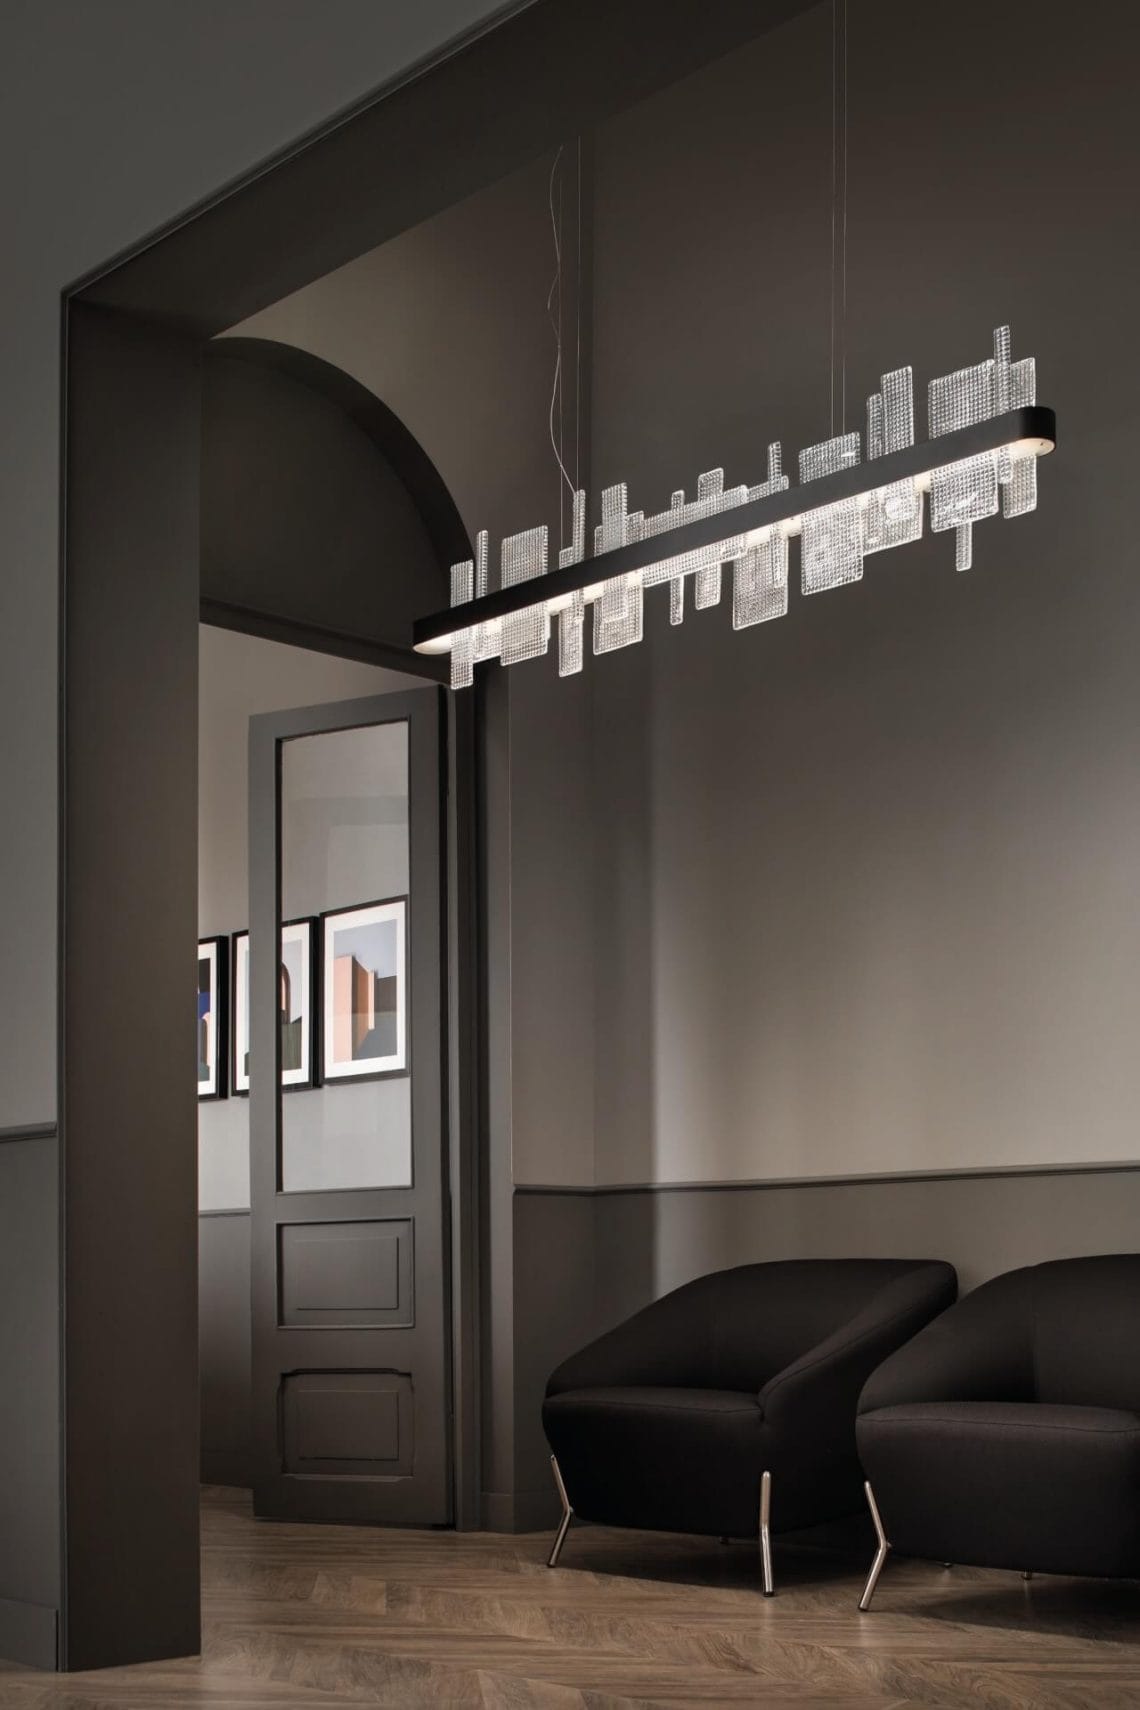 Sources Unlimited launched ‘Ribbon’ light collection of Masiero